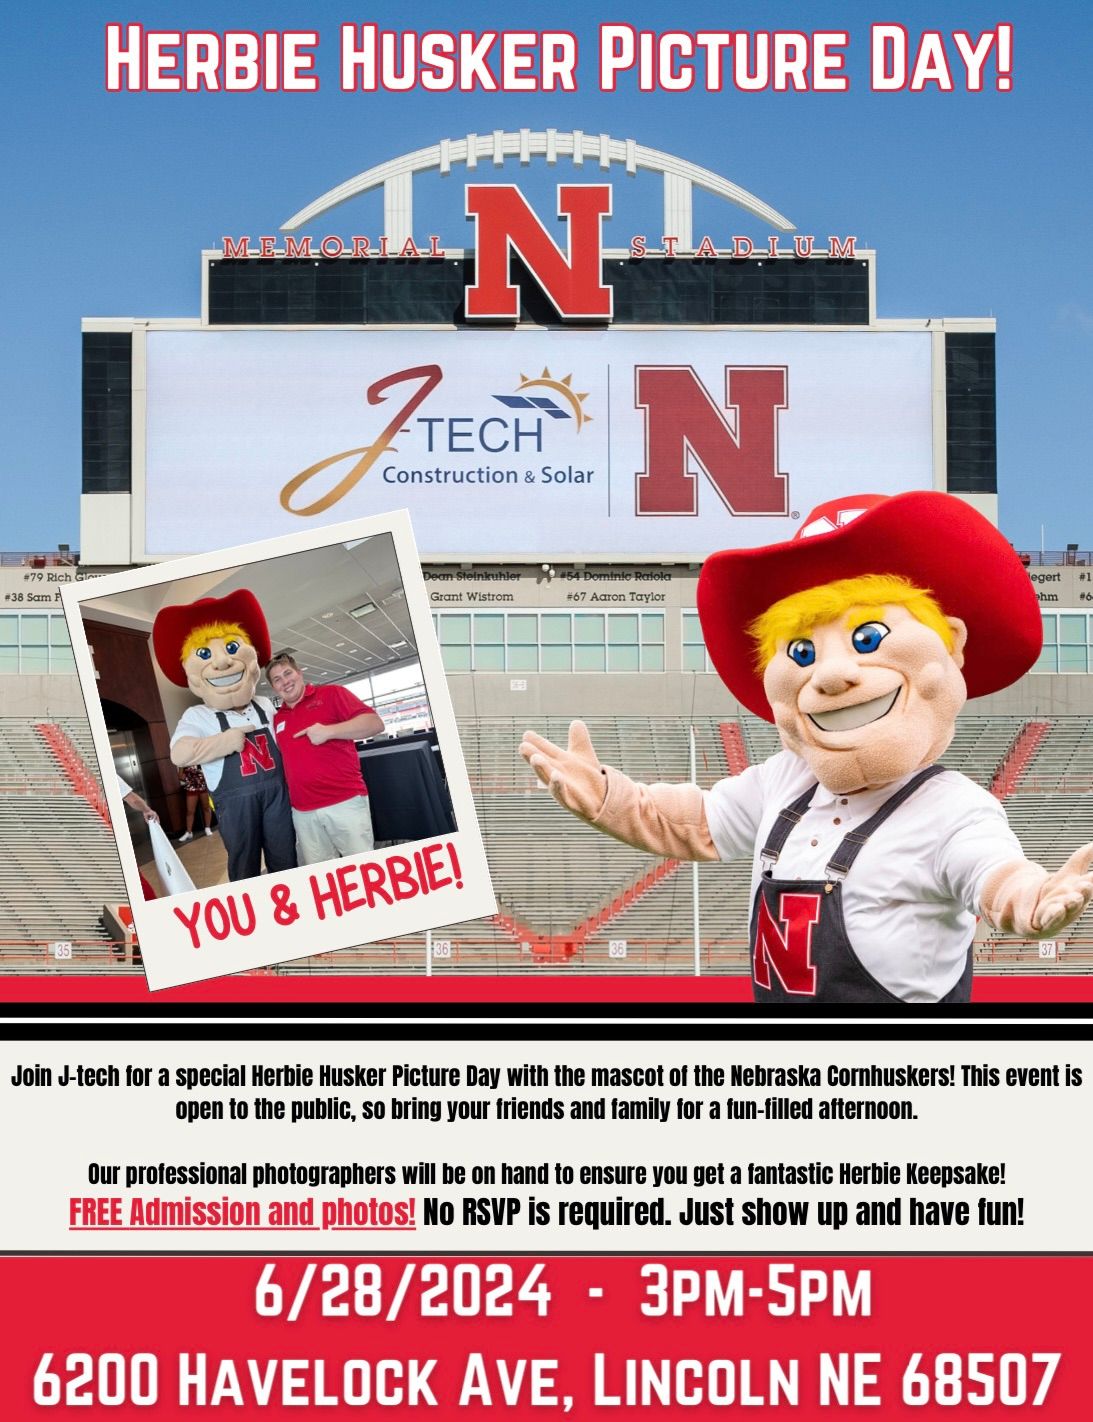 Herbie Husker Picture Day with J-Tech